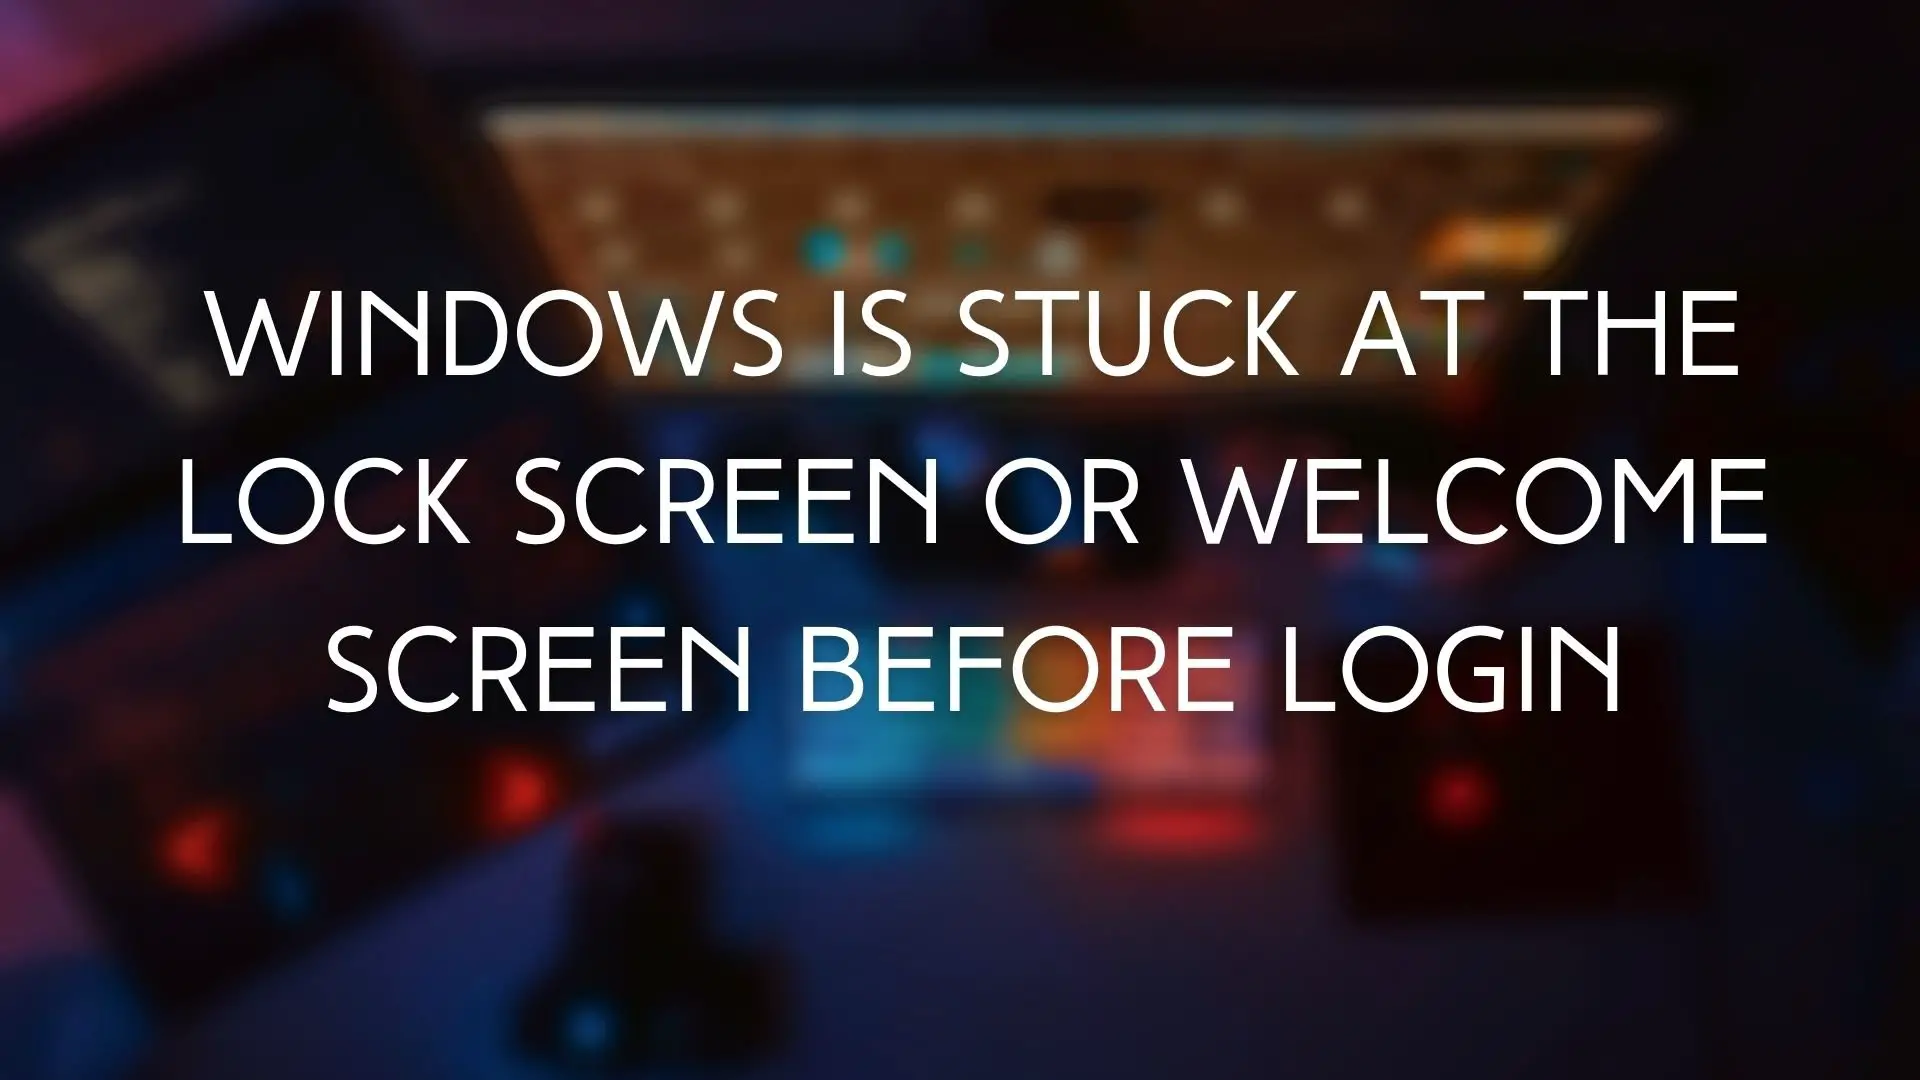 Windows Is Stuck At The Lock Screen Or Welcome Screen